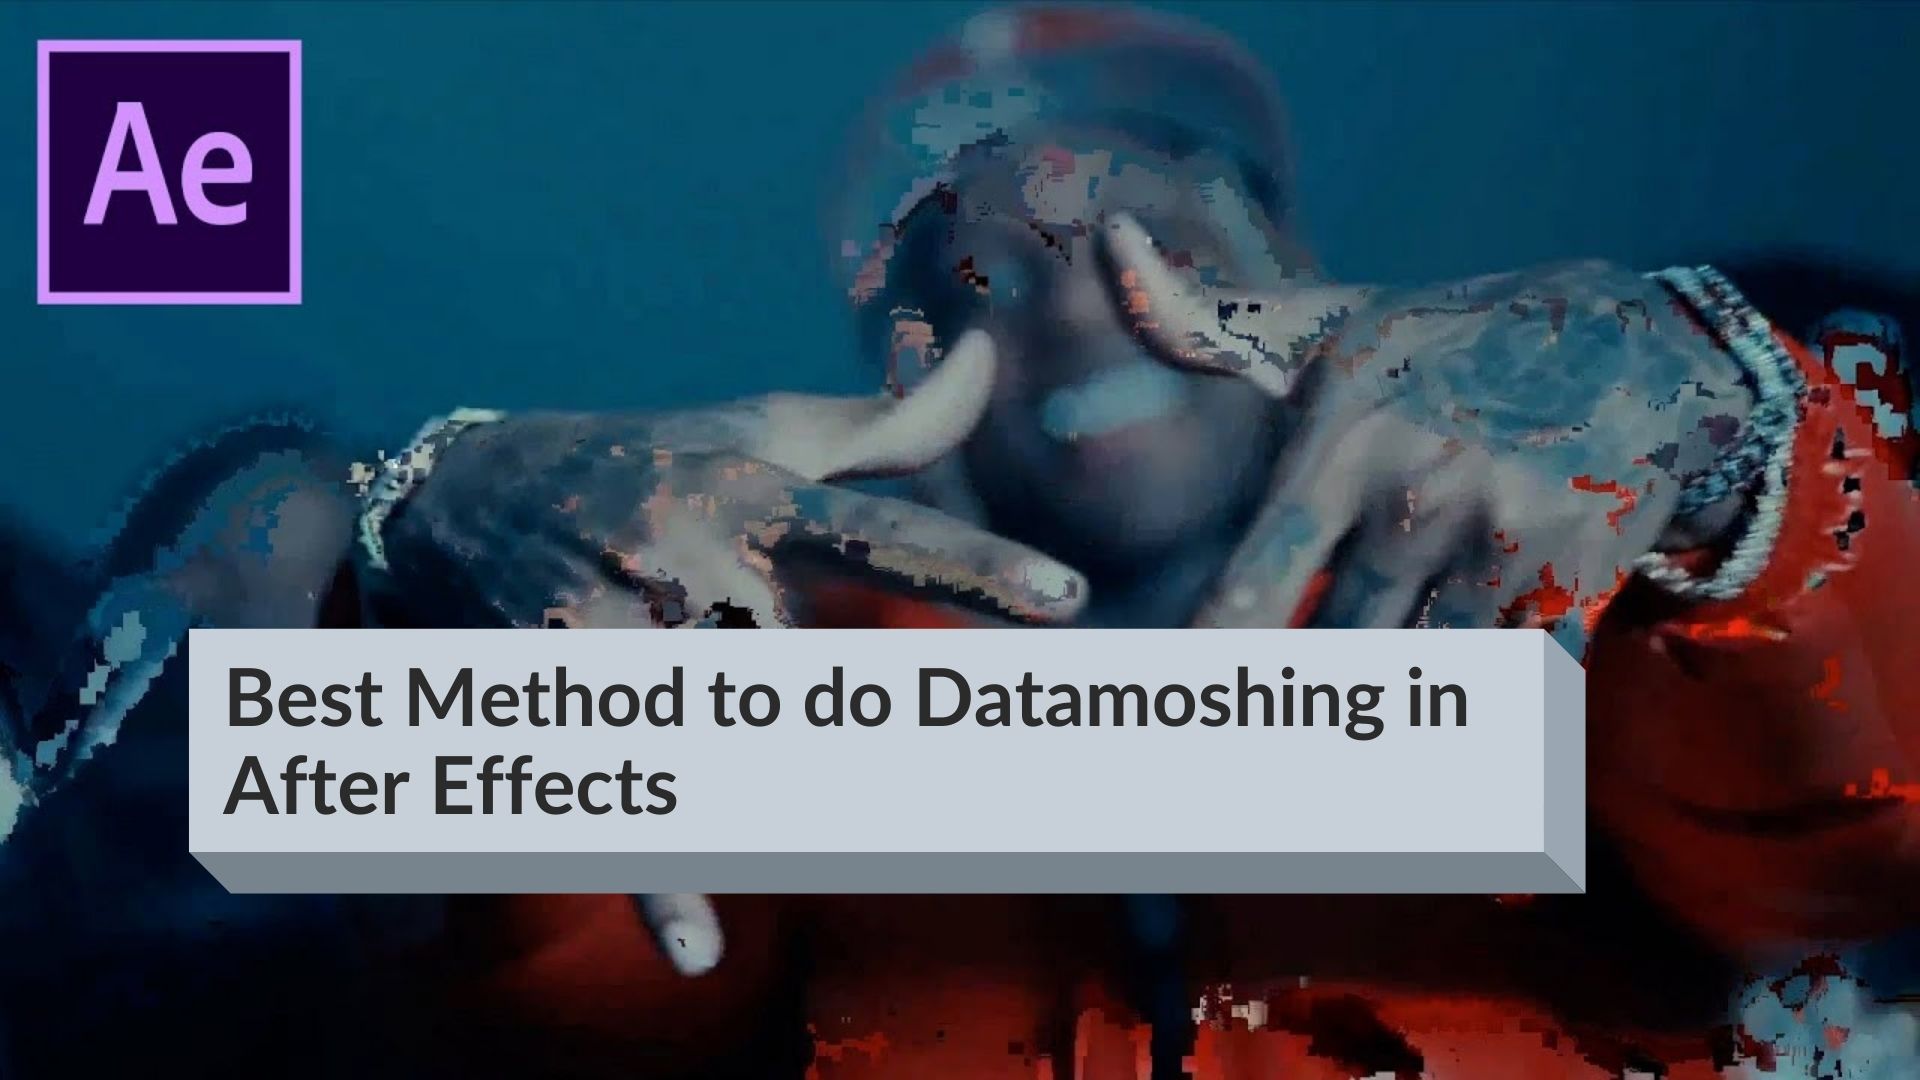 how to datamosh in after effects